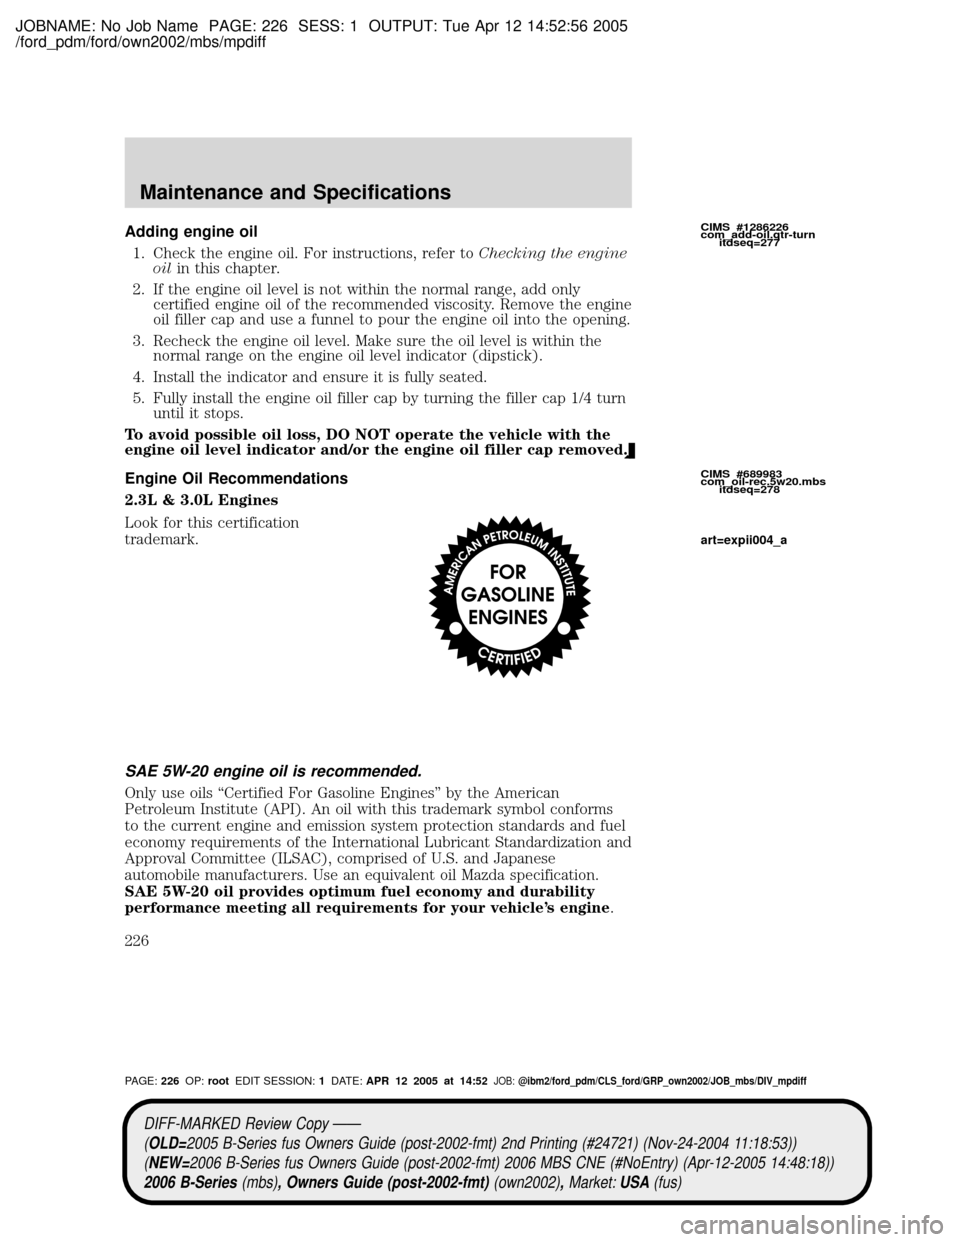 MAZDA MODEL B2300 TRUCK 2006  Owners Manual (in English) JOBNAME: No Job Name PAGE: 226 SESS: 1 OUTPUT: Tue Apr 12 14:52:56 2005
/ford_pdm/ford/own2002/mbs/mpdiff
Adding engine oil
1. Check the engine oil. For instructions, refer toChecking the engine
oilin